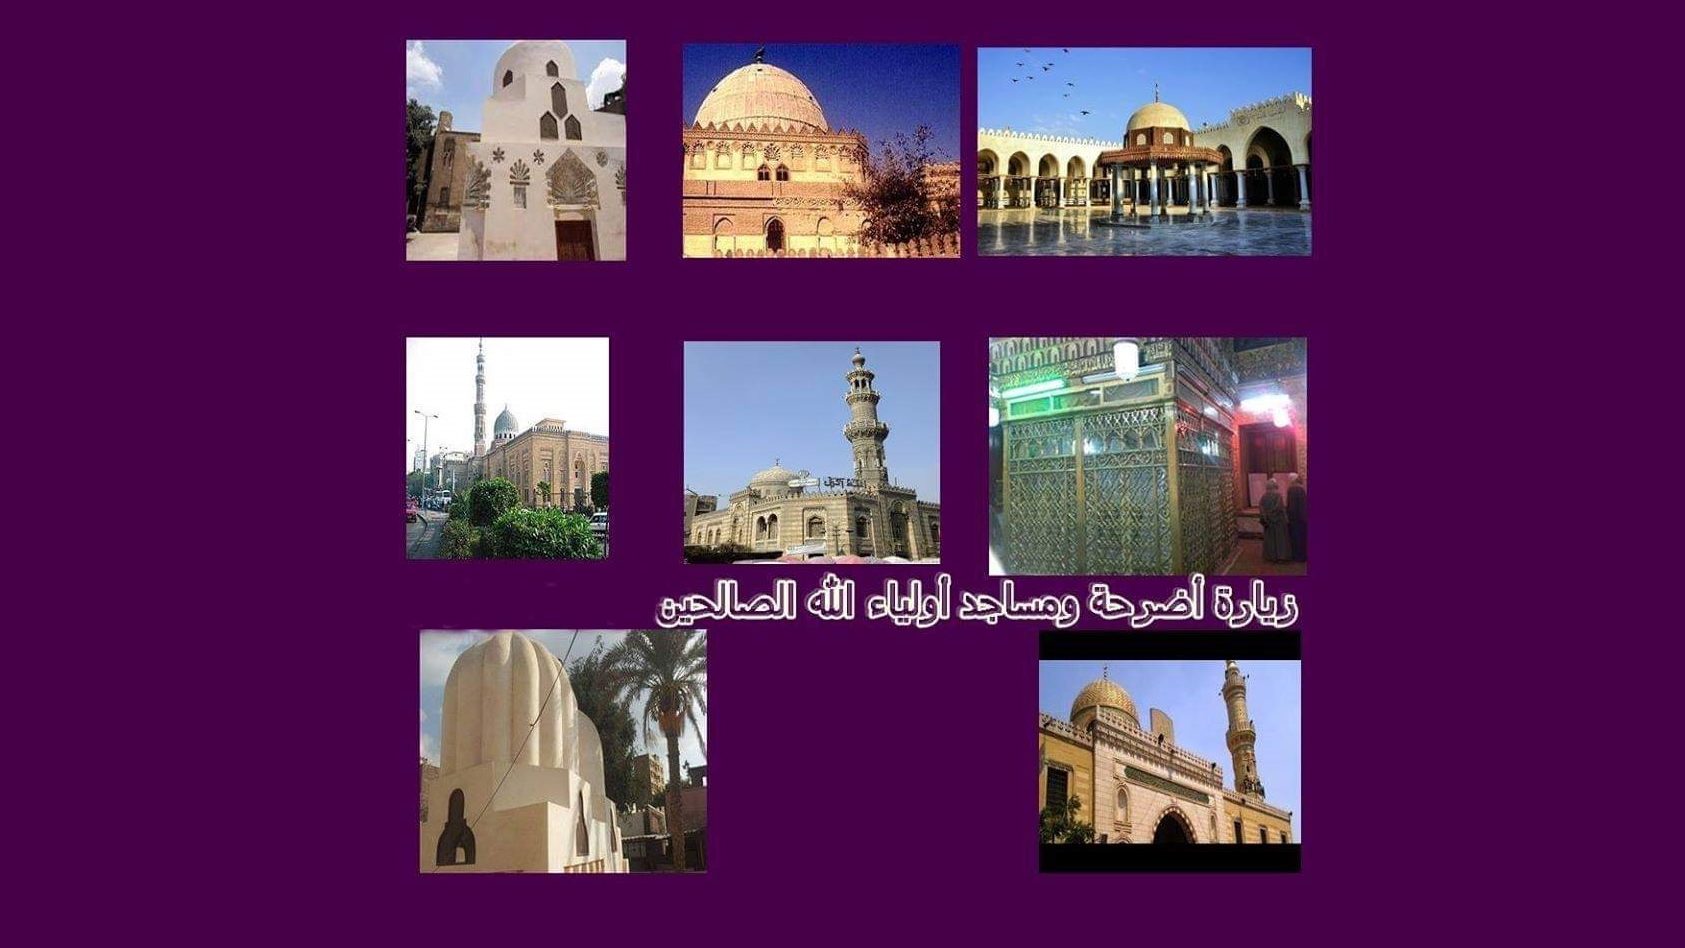 Holy Shrines and Mosques of Cairo